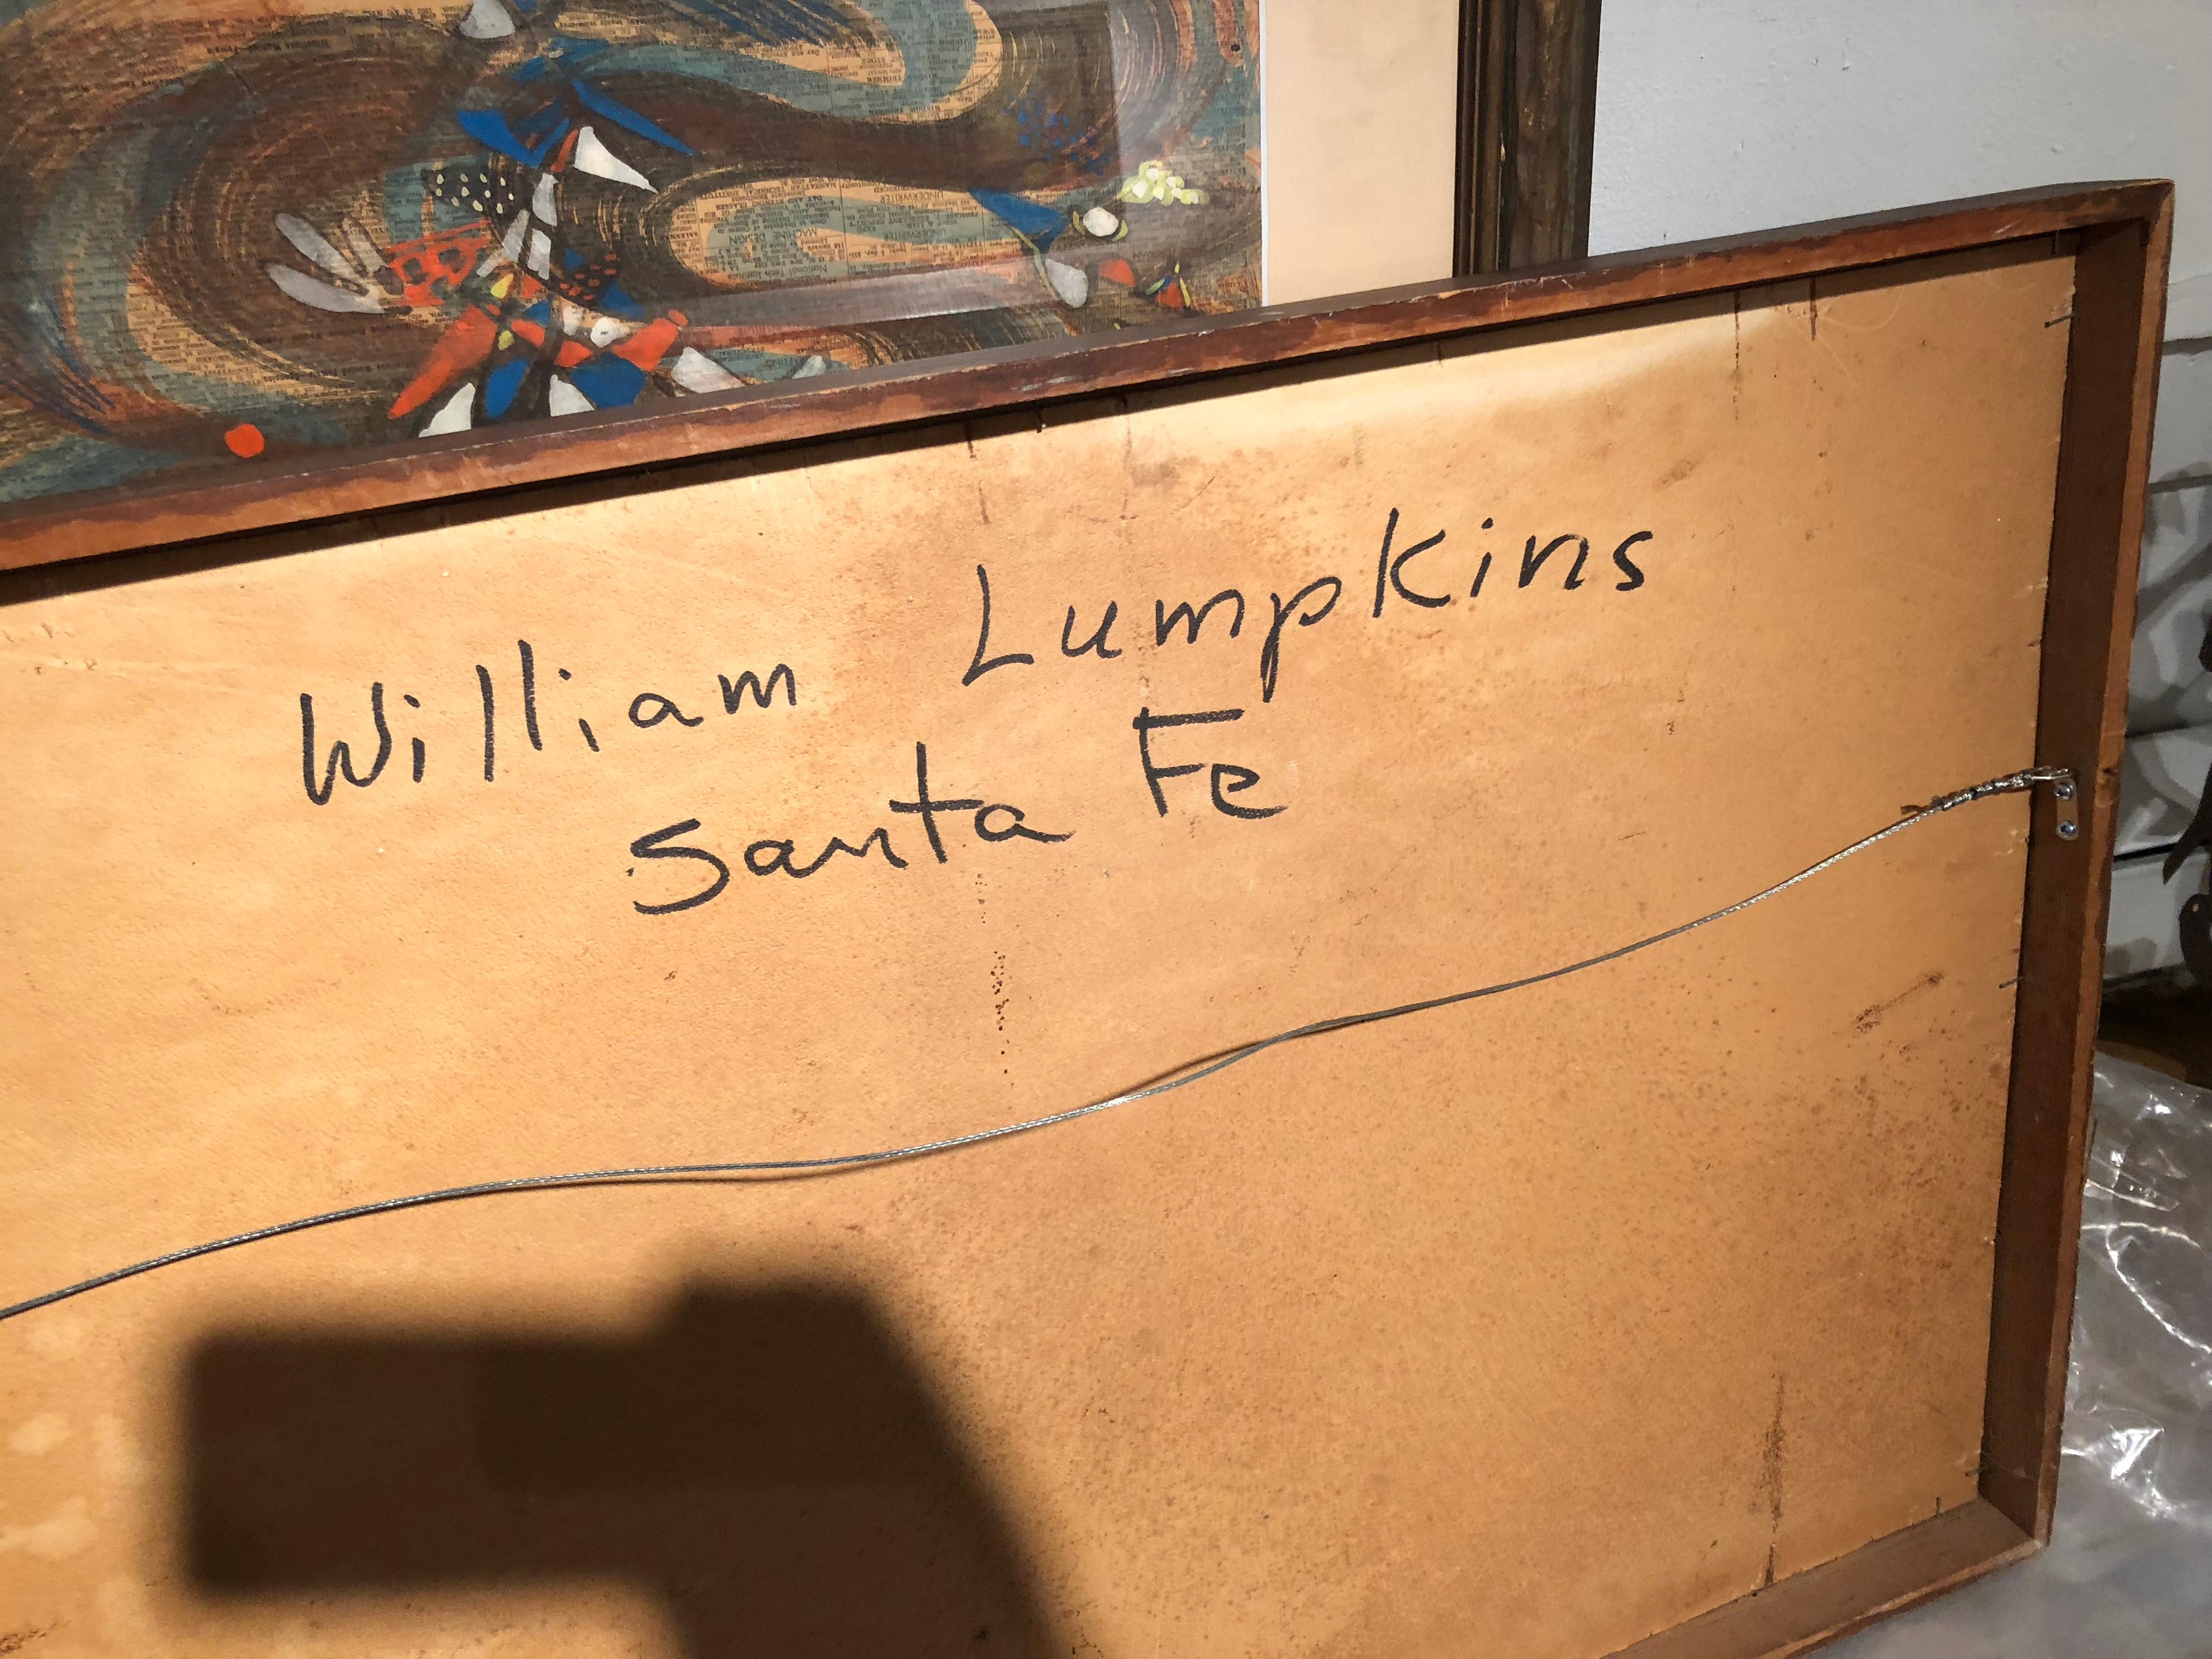 Untitled, Transcendentalist, Indian Motif - Painting by William Lumpkins